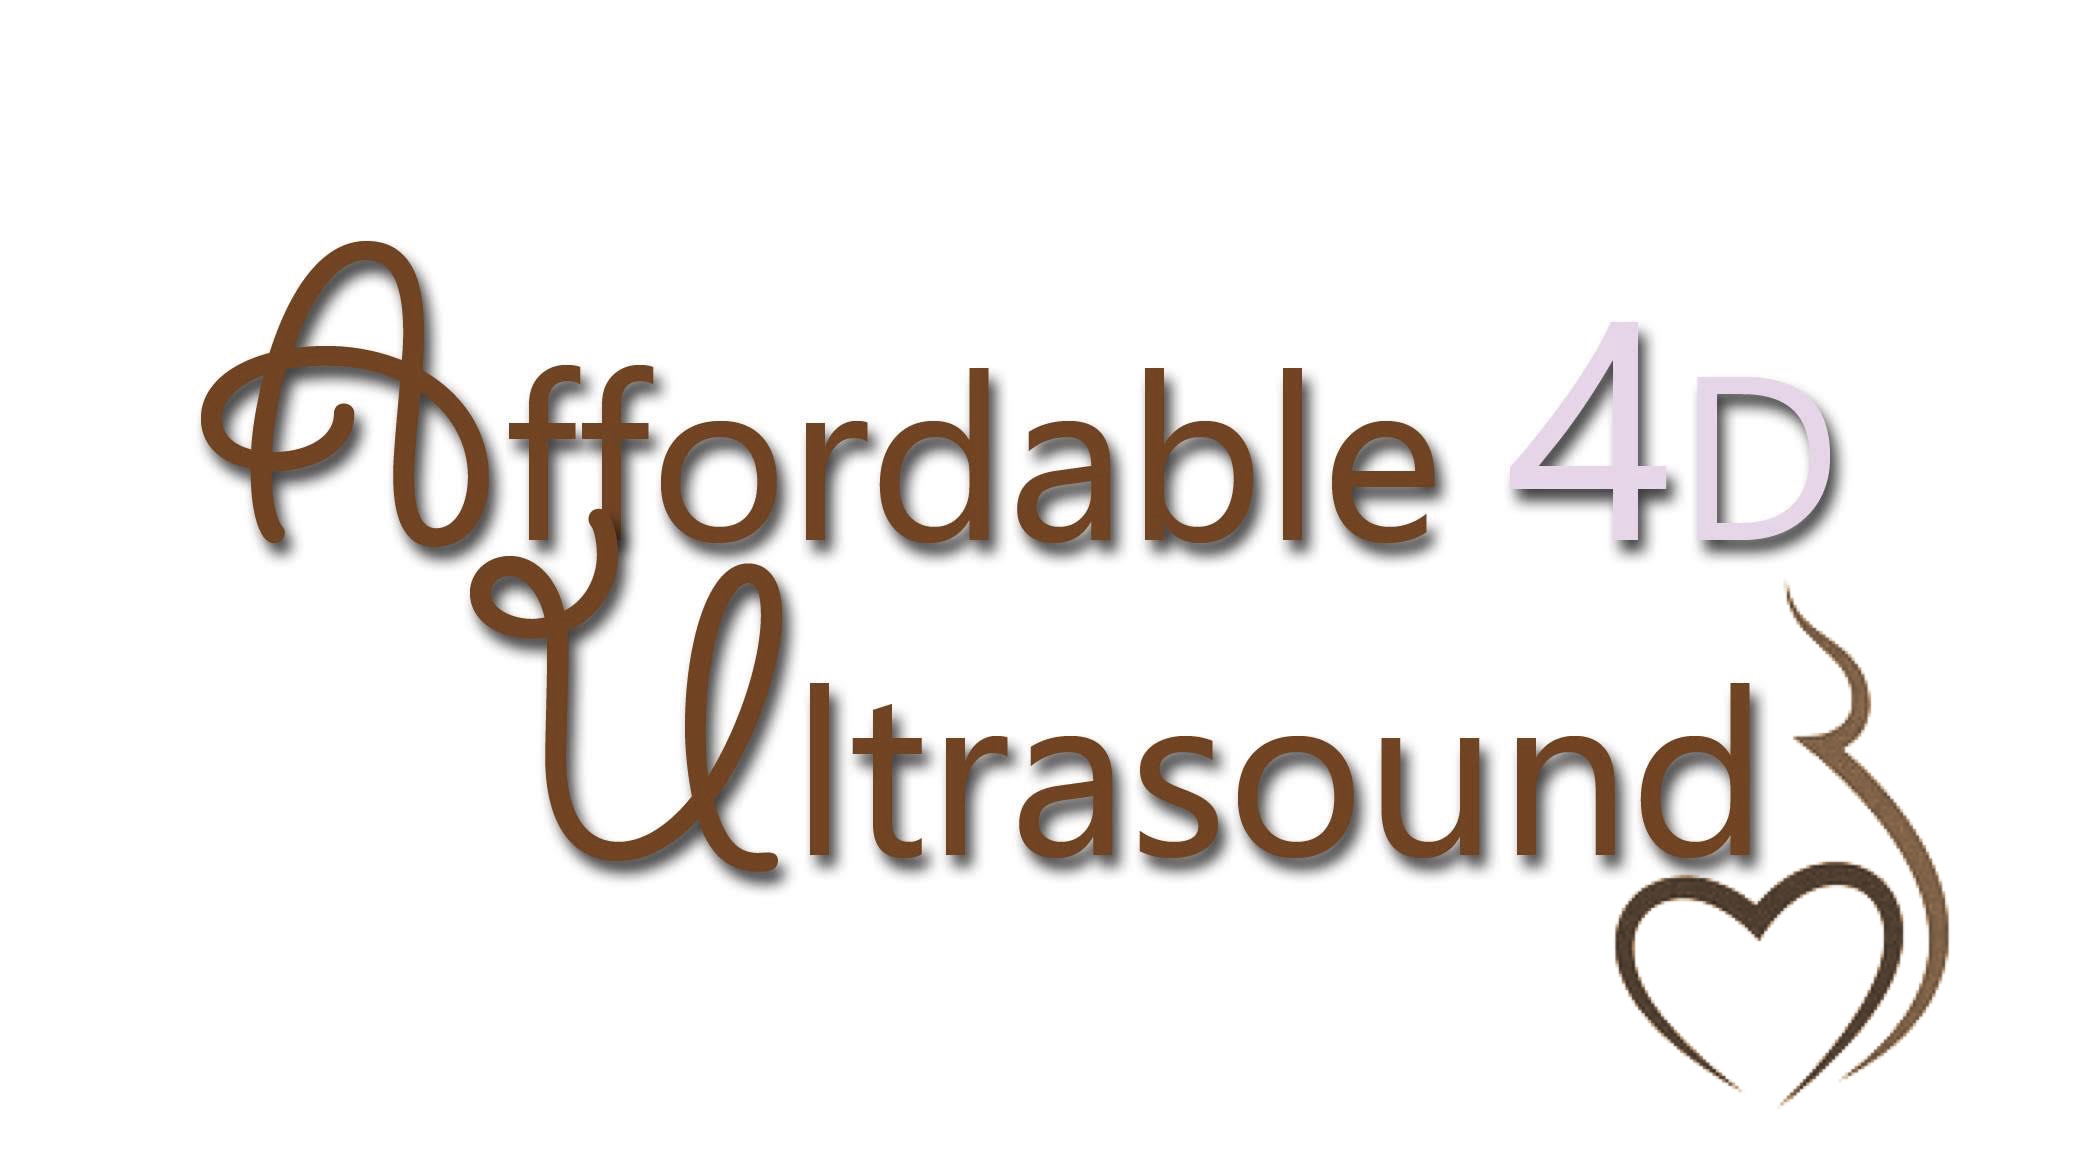 Affordable 3D/4D Ultrasound in Houston Texas